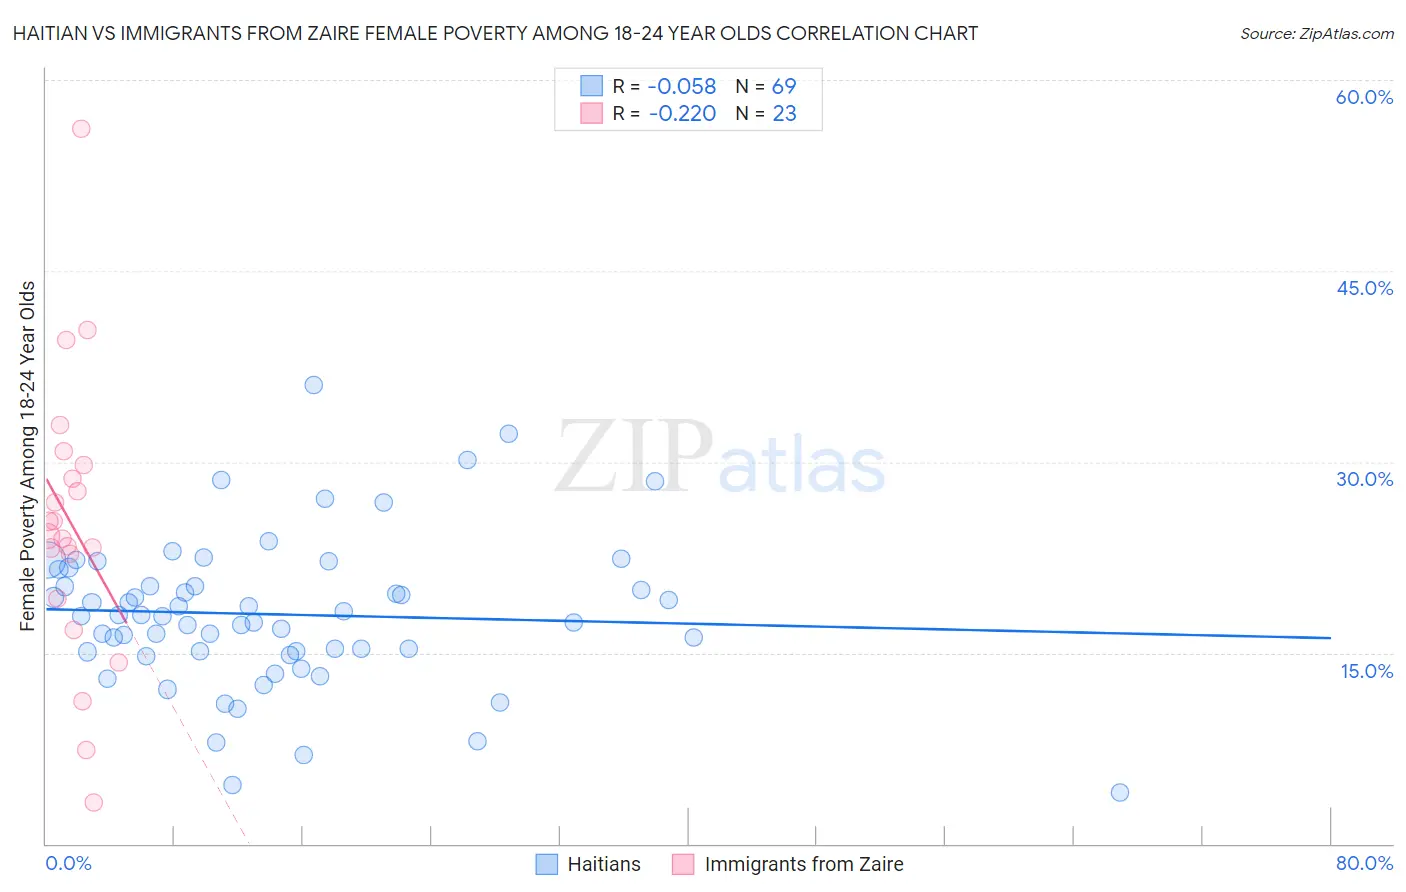 Haitian vs Immigrants from Zaire Female Poverty Among 18-24 Year Olds